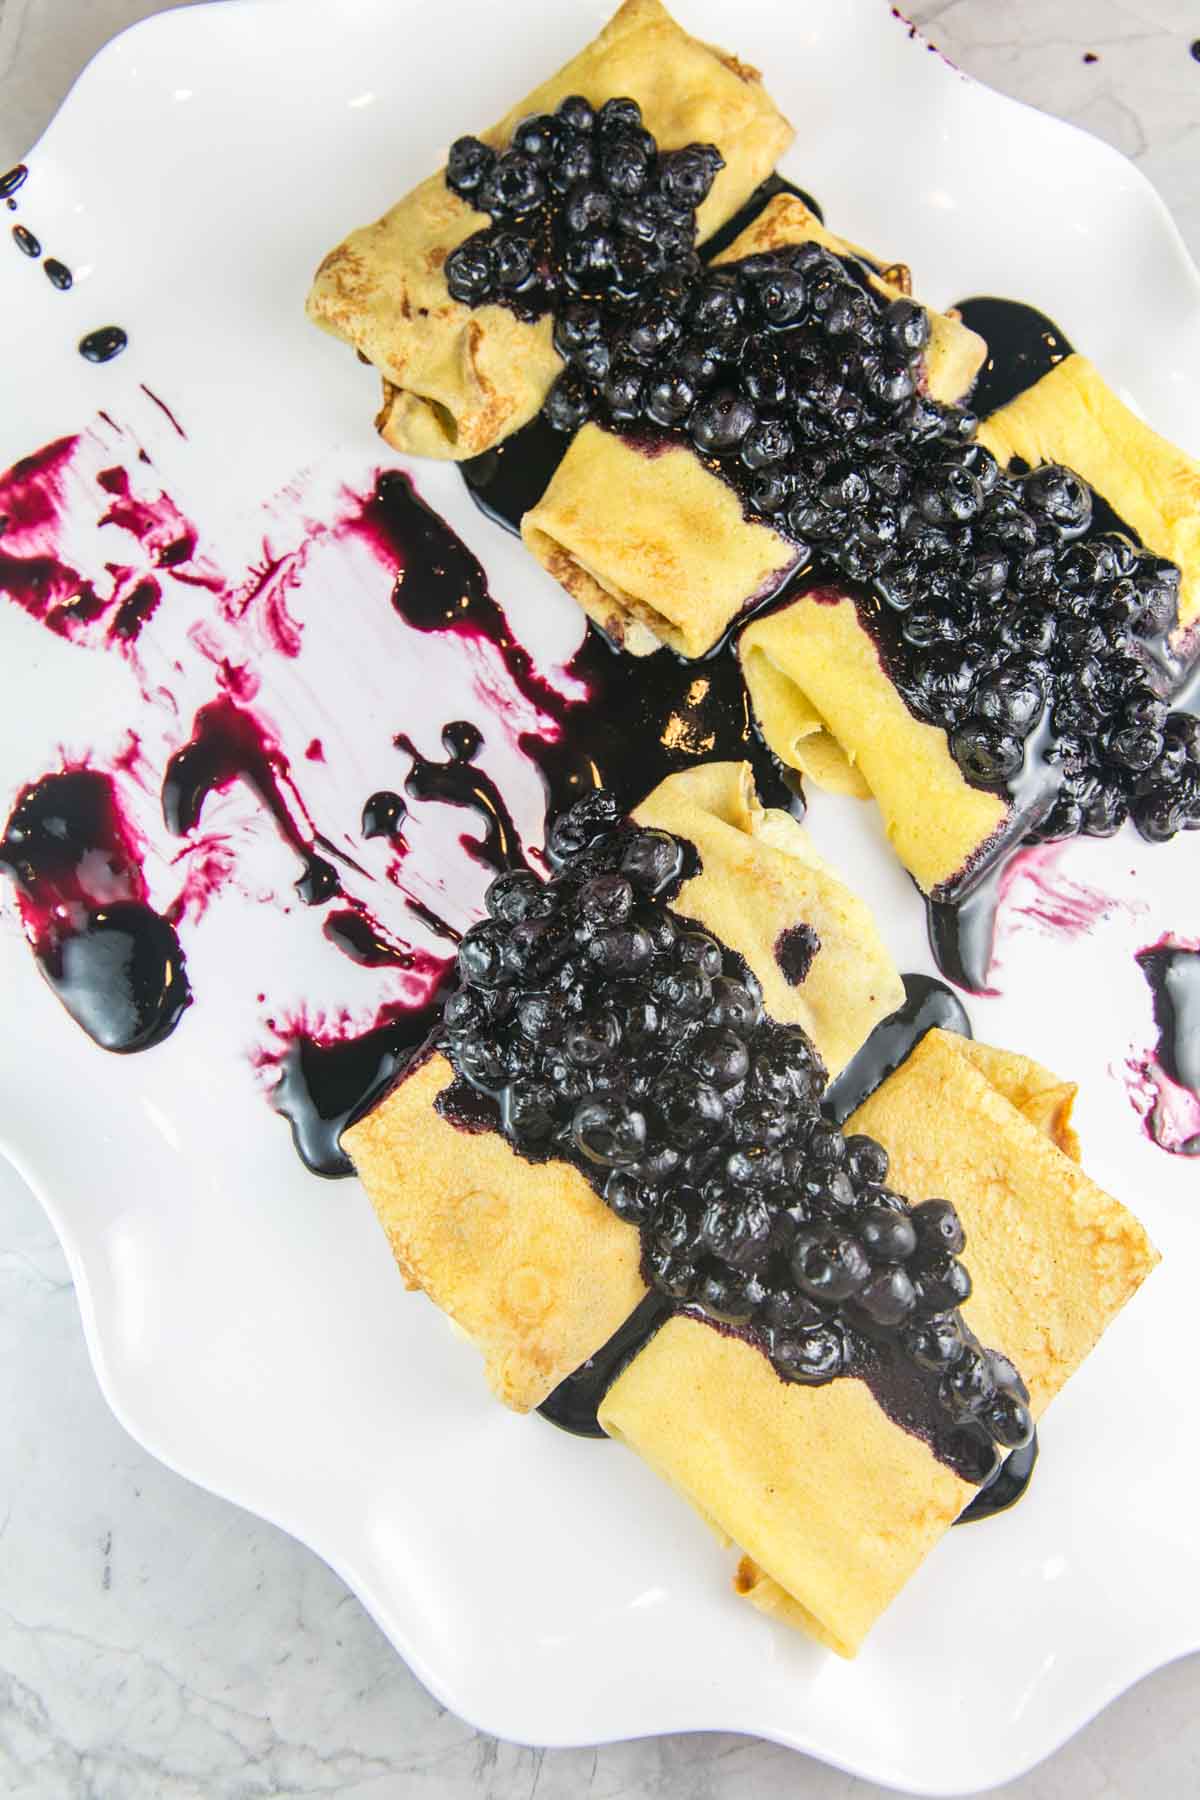 five ricotta blintzes covered in blueberry sauce with sauce splattered across the plate